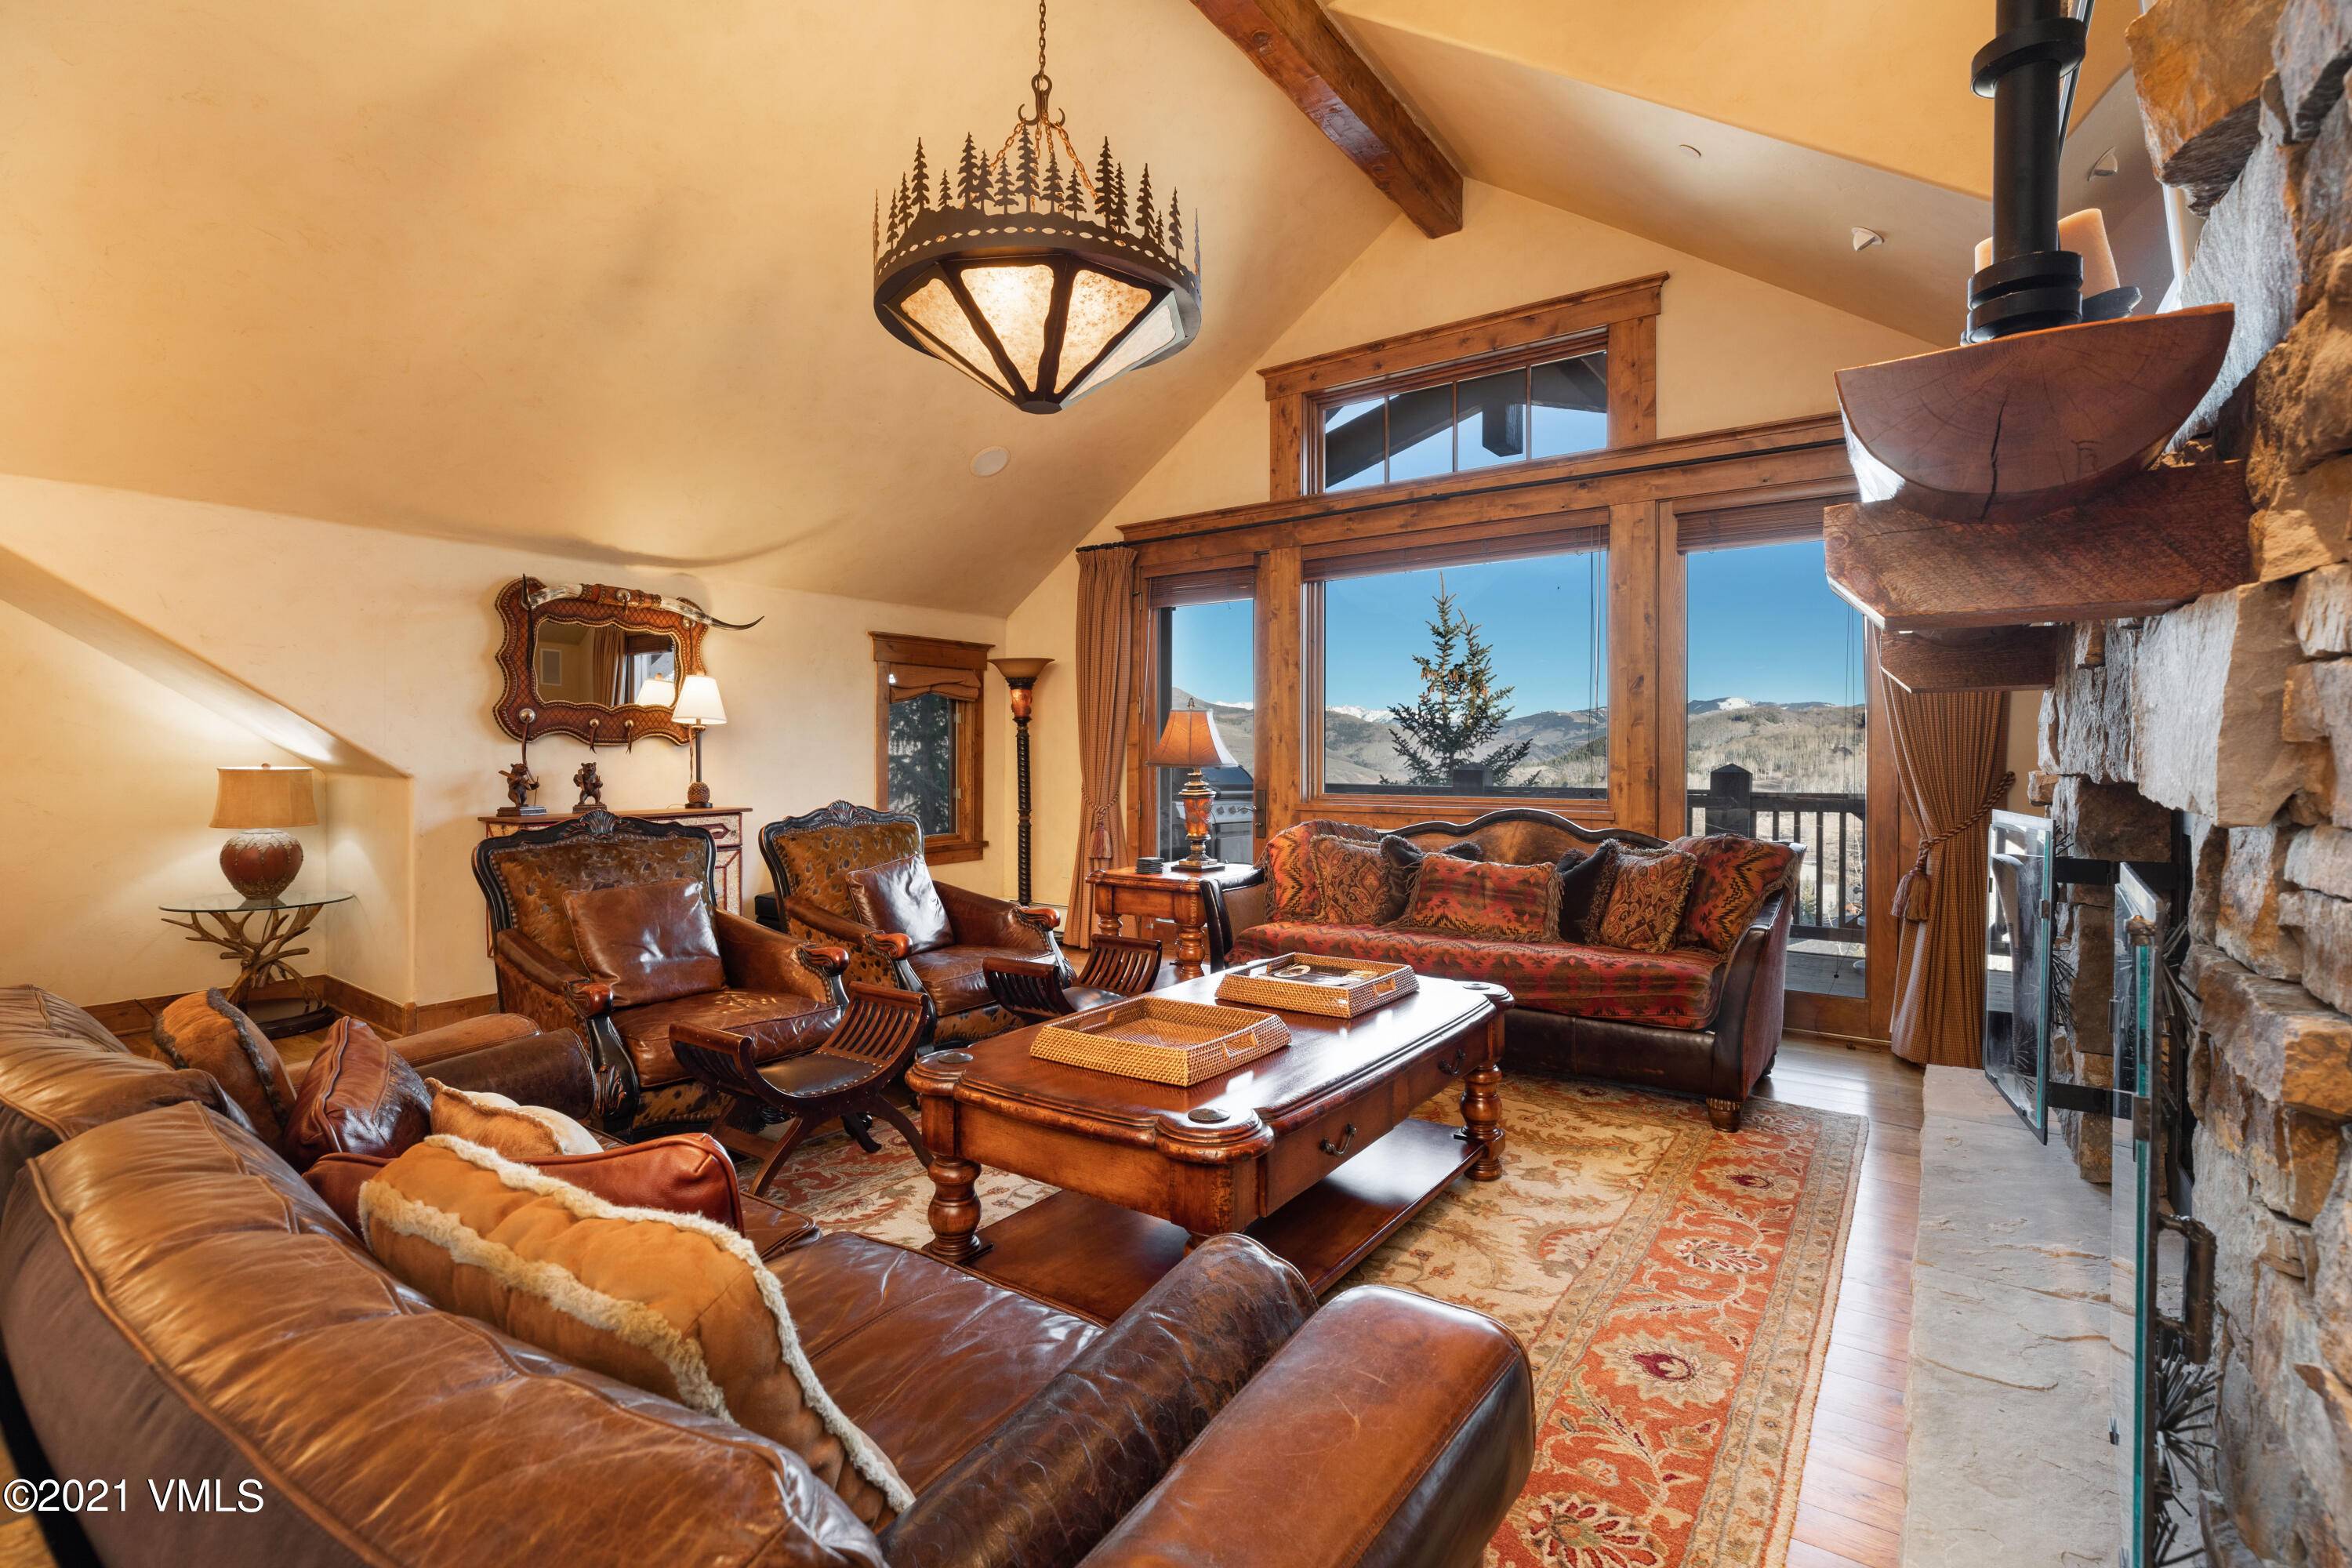 Furnished 4 bedroom penthouse, enormous views to the Gore Range and sublime ski in ski out access on Roughlock ski way.